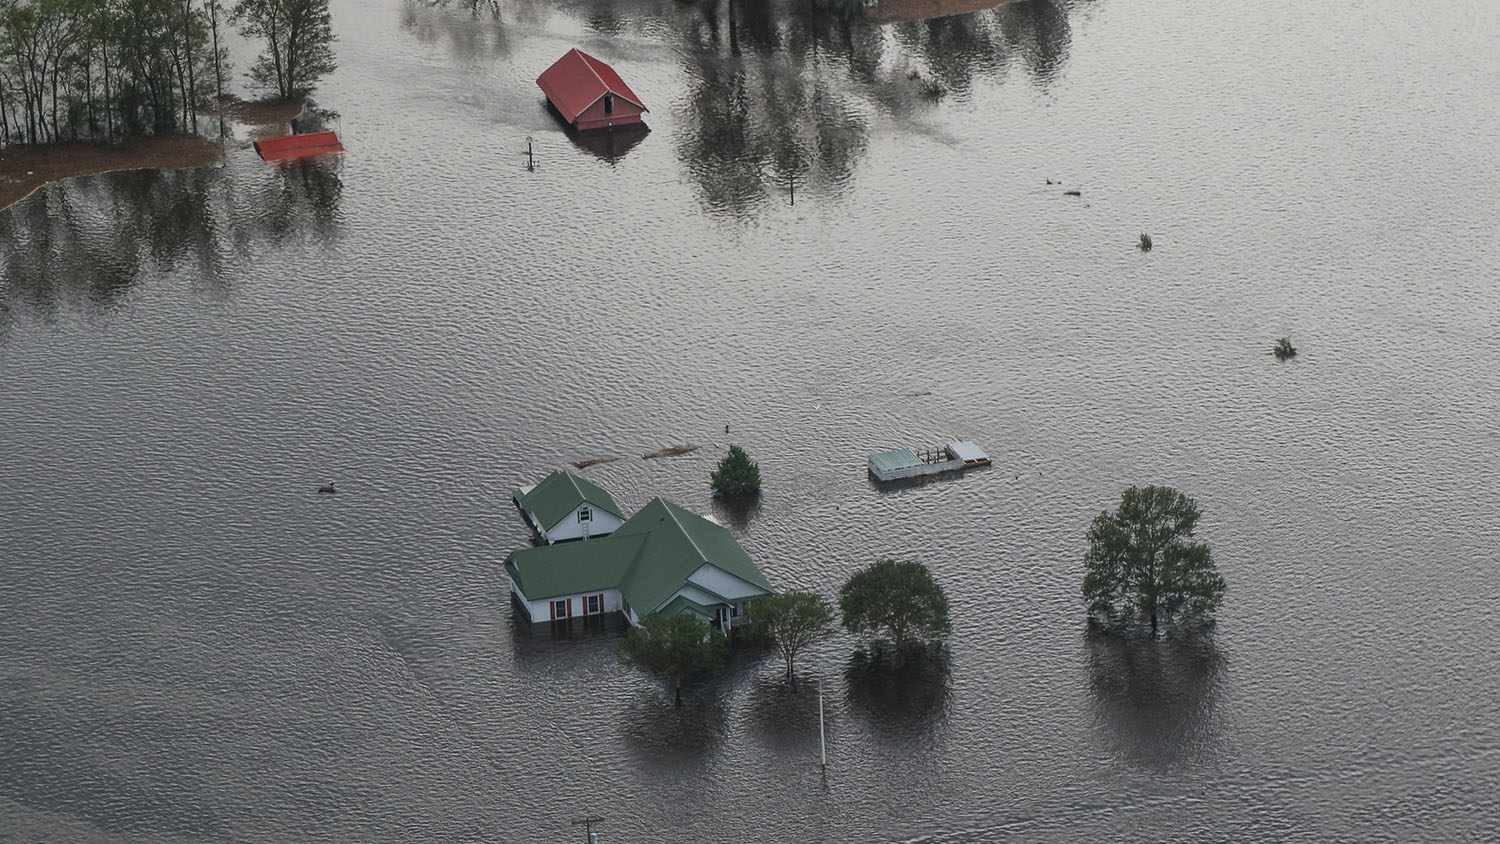 aerial view of a farmhouse, vehicles and outbuildings during a flood. all of the structures are submerged, leaving only roofs exposed